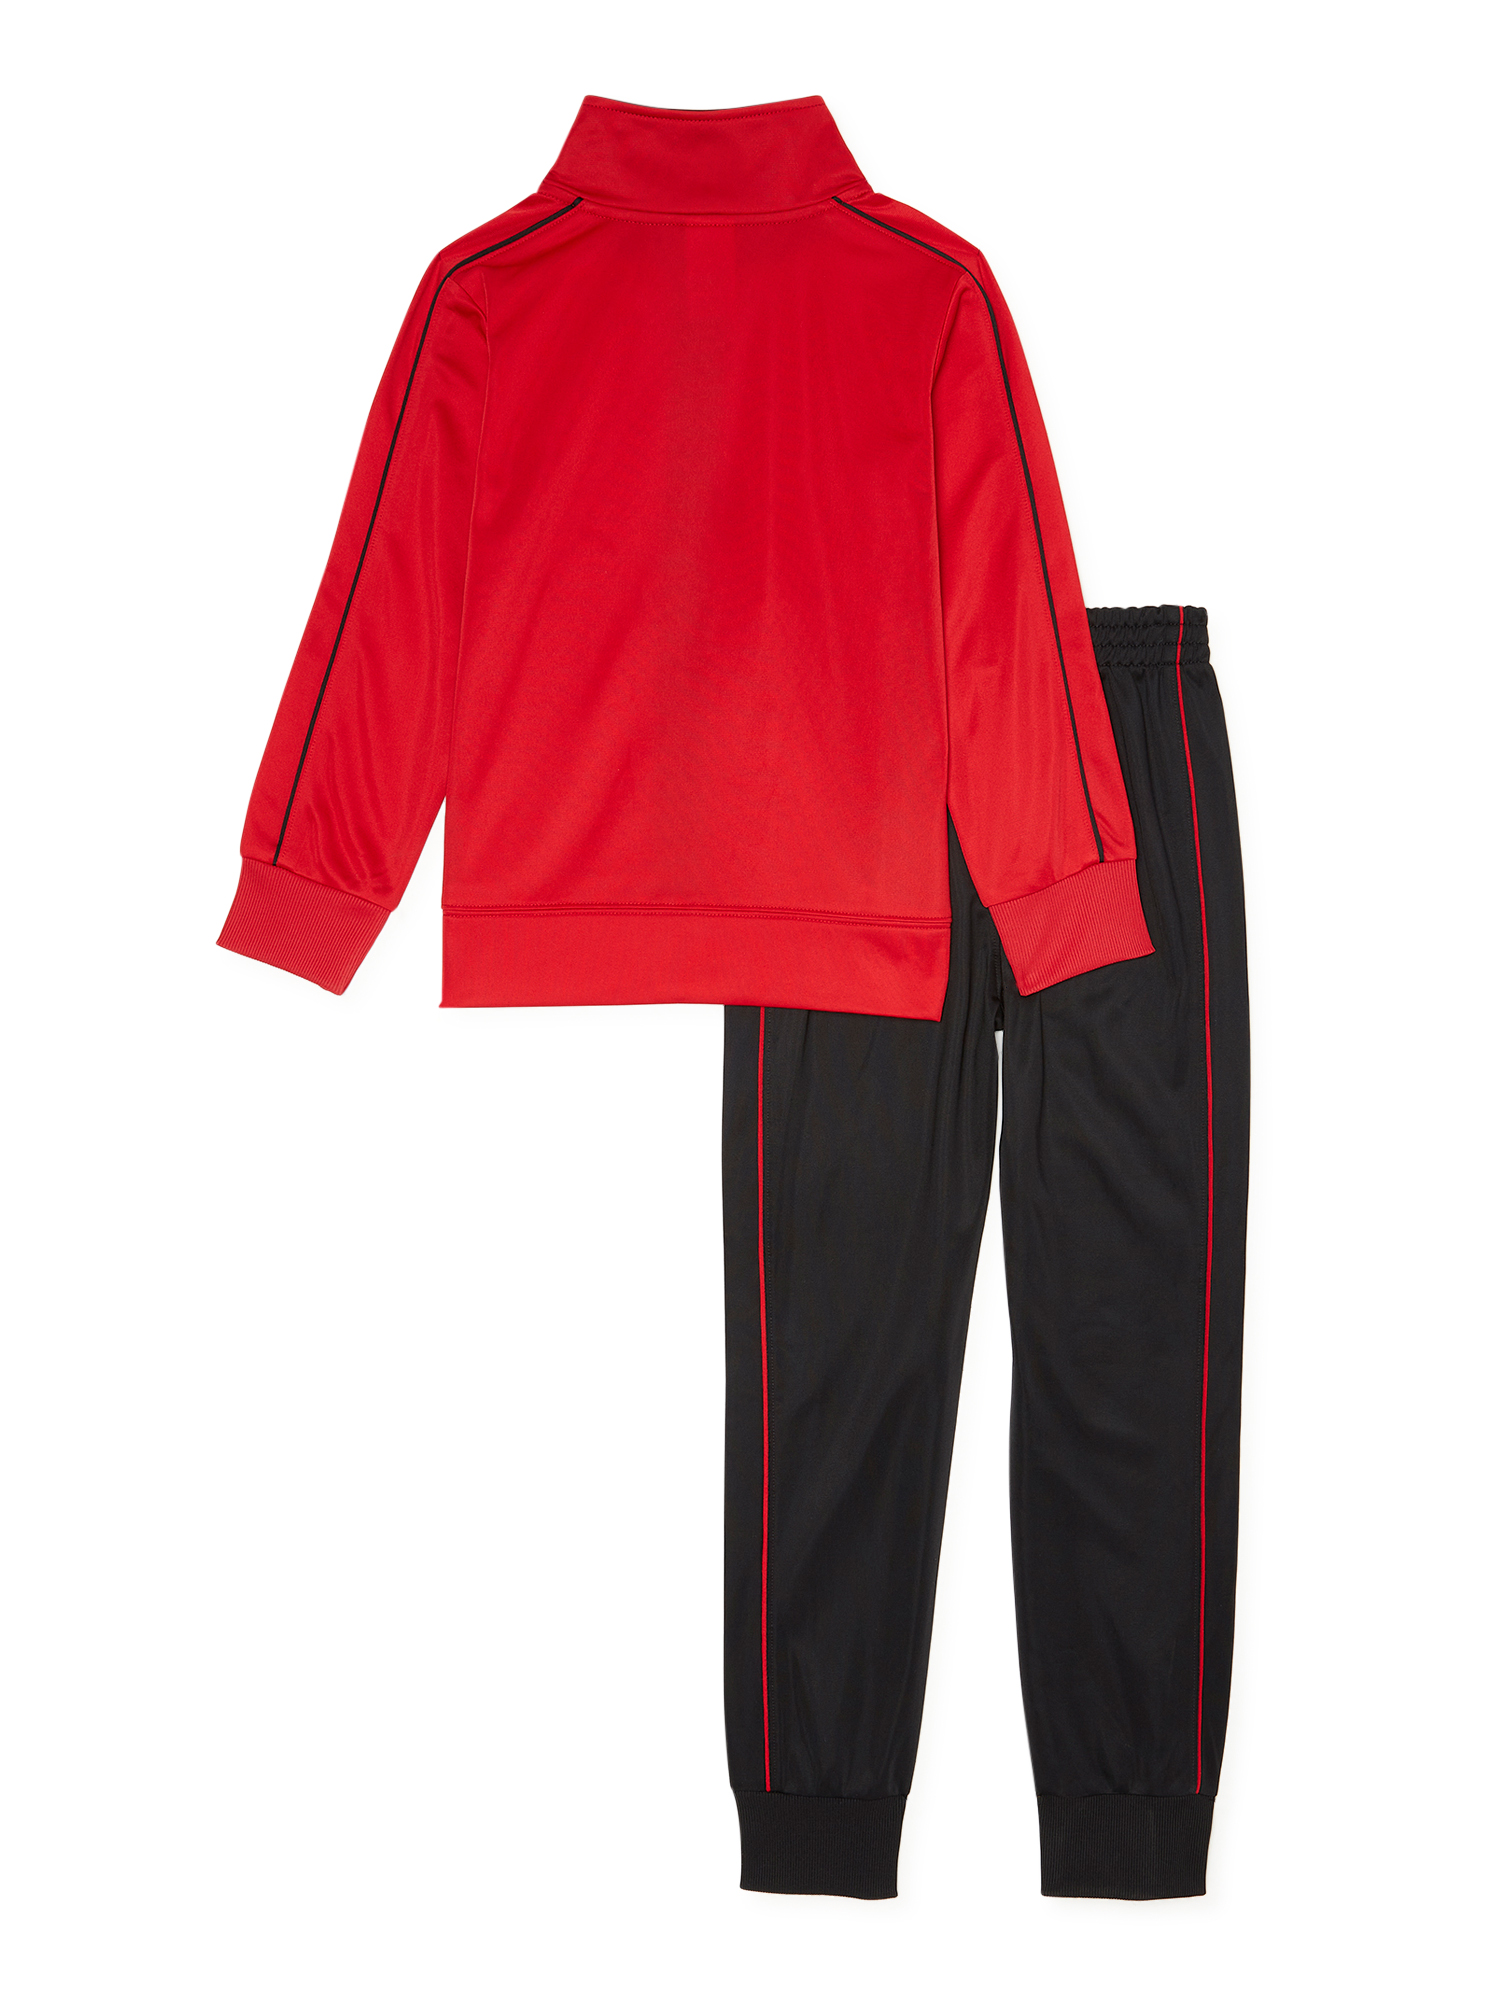 Cheetah Boys’ Tricot Performance Tracksuit, 2-Piece Outfit Set, Sizes 4-16 & Husky - image 2 of 3